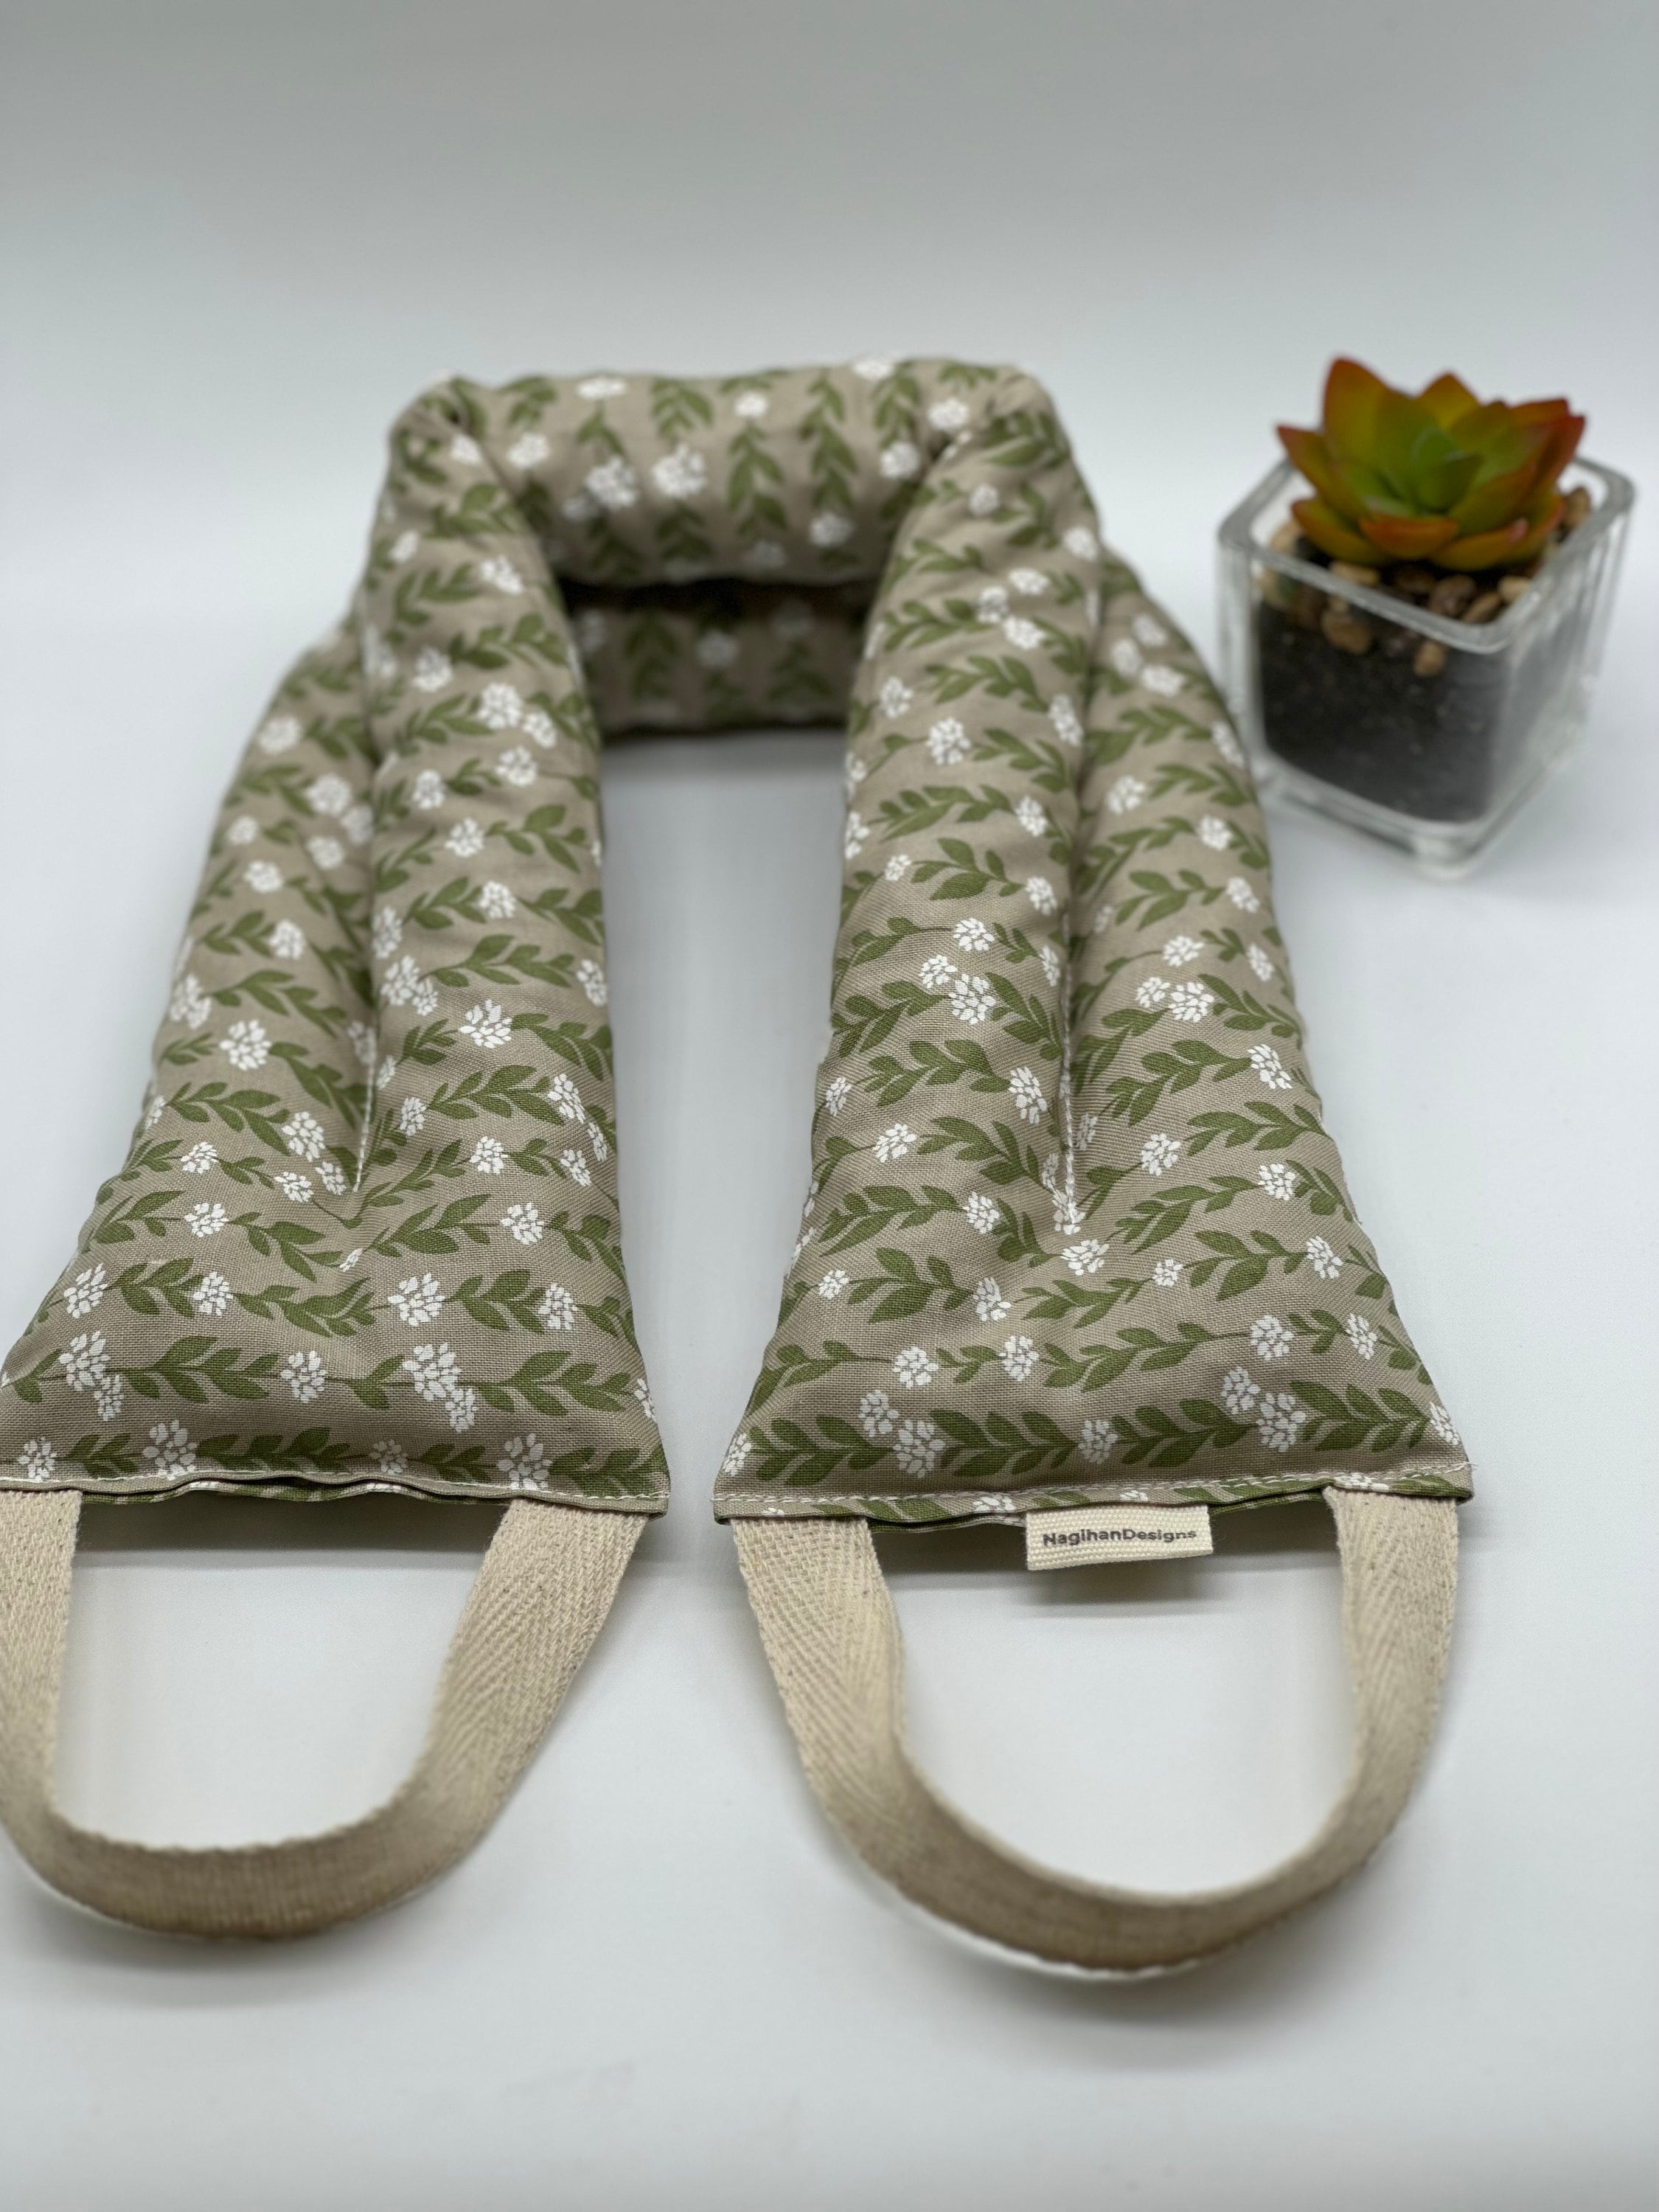 Products :: CHERRY PIT Neck Wrap with Handle Microwaveable